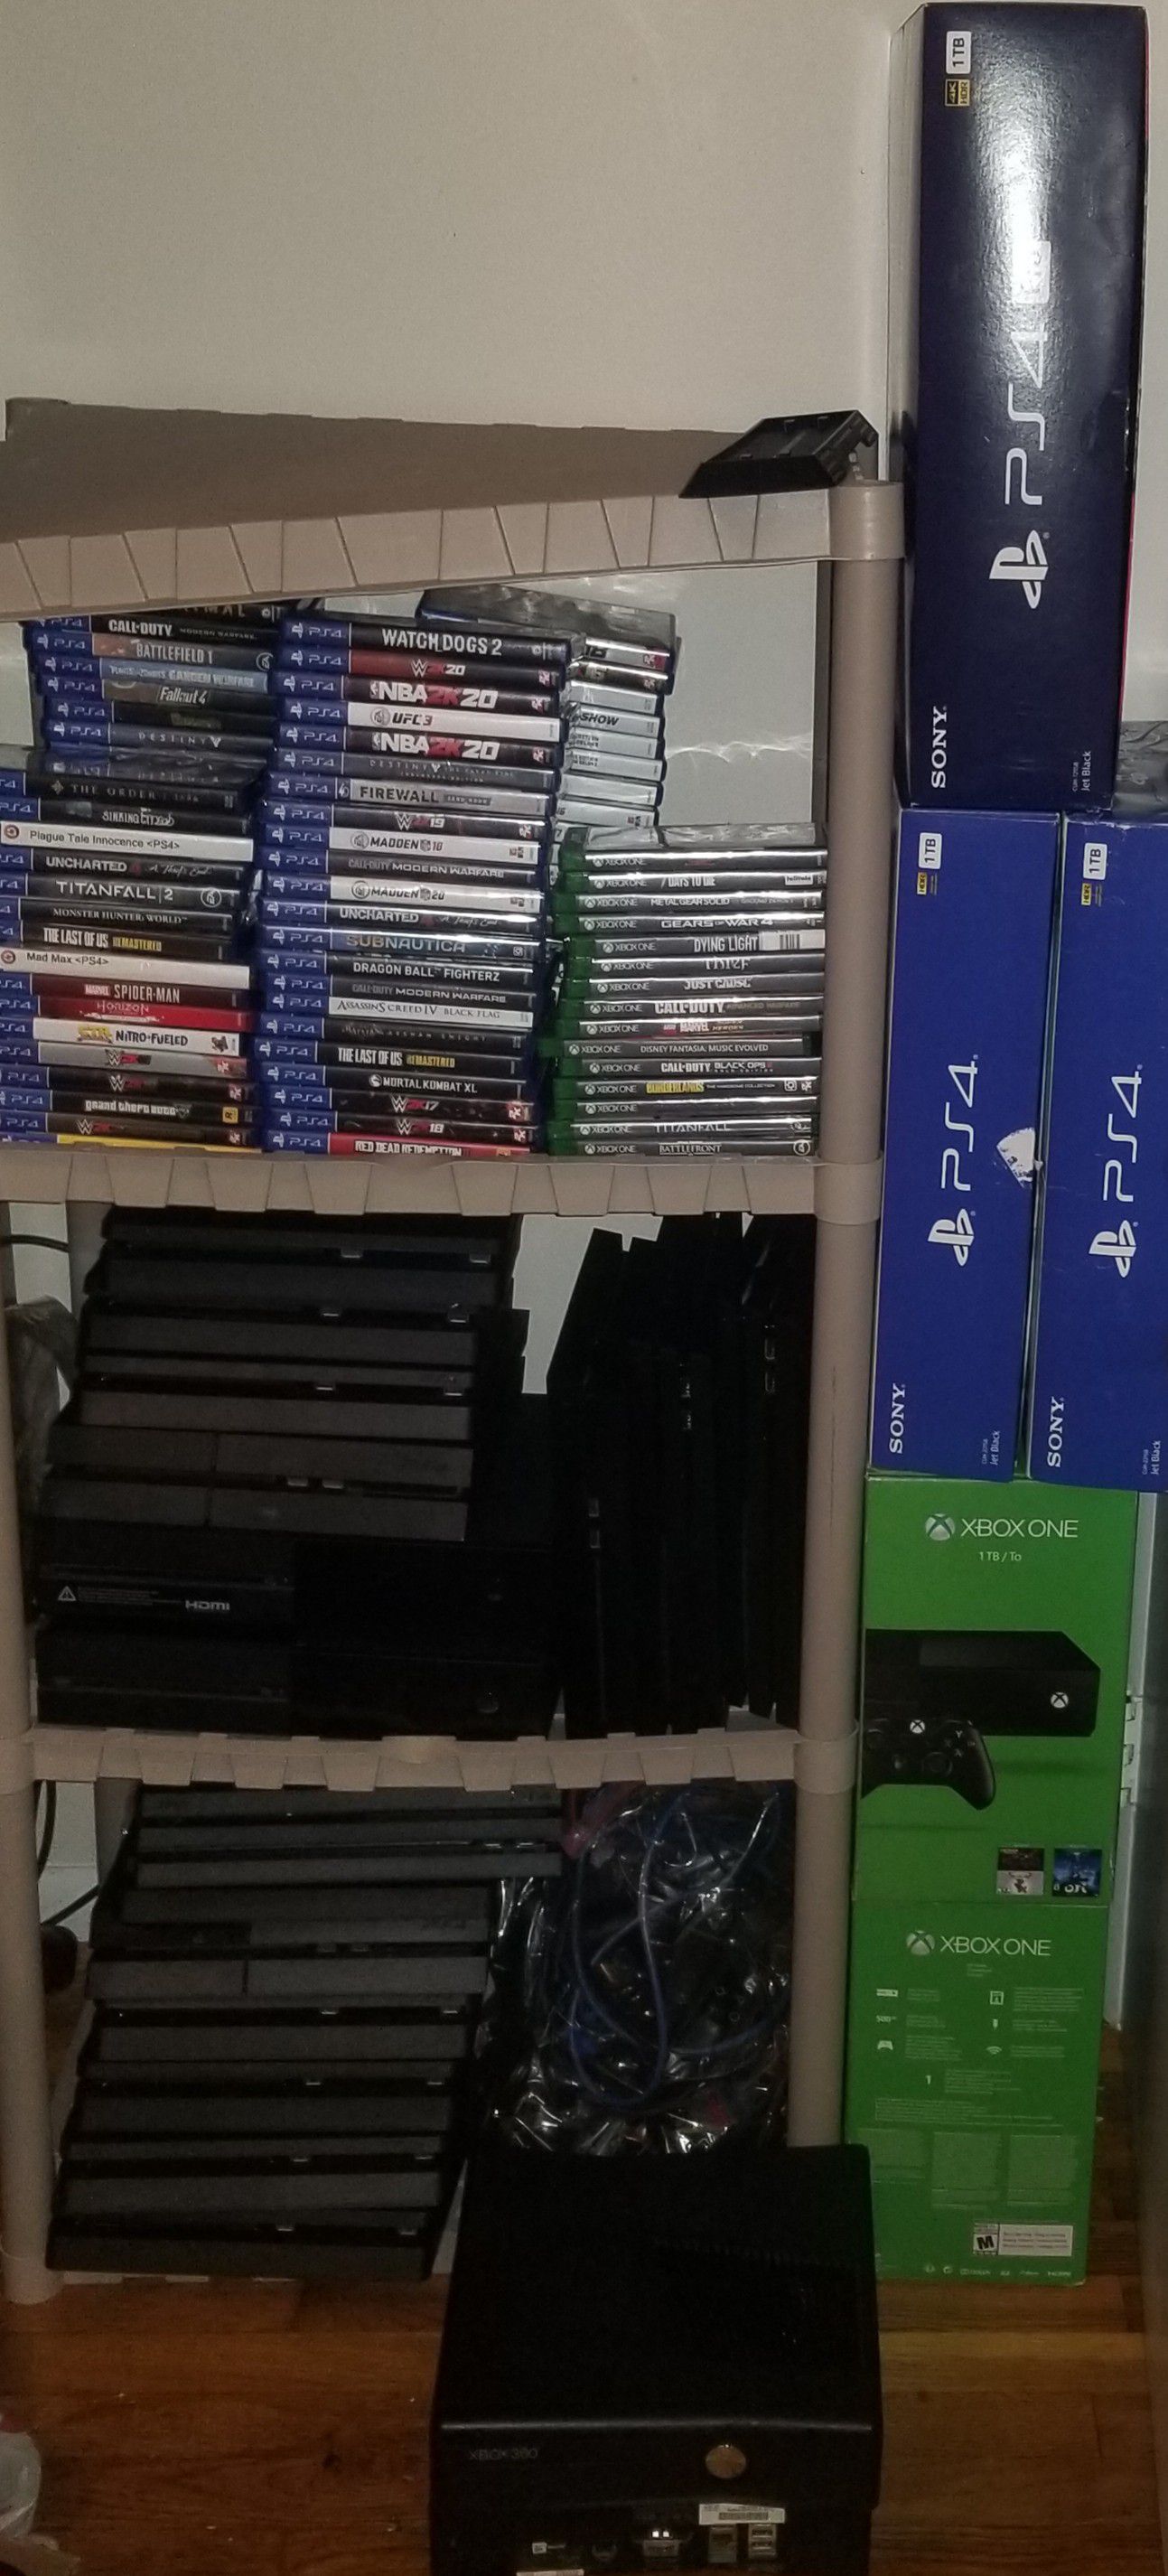 GAMING CONSOLES. Ps4s, xbox one, xbox 360, wii, ps2, ps1. REFURBISHED .  